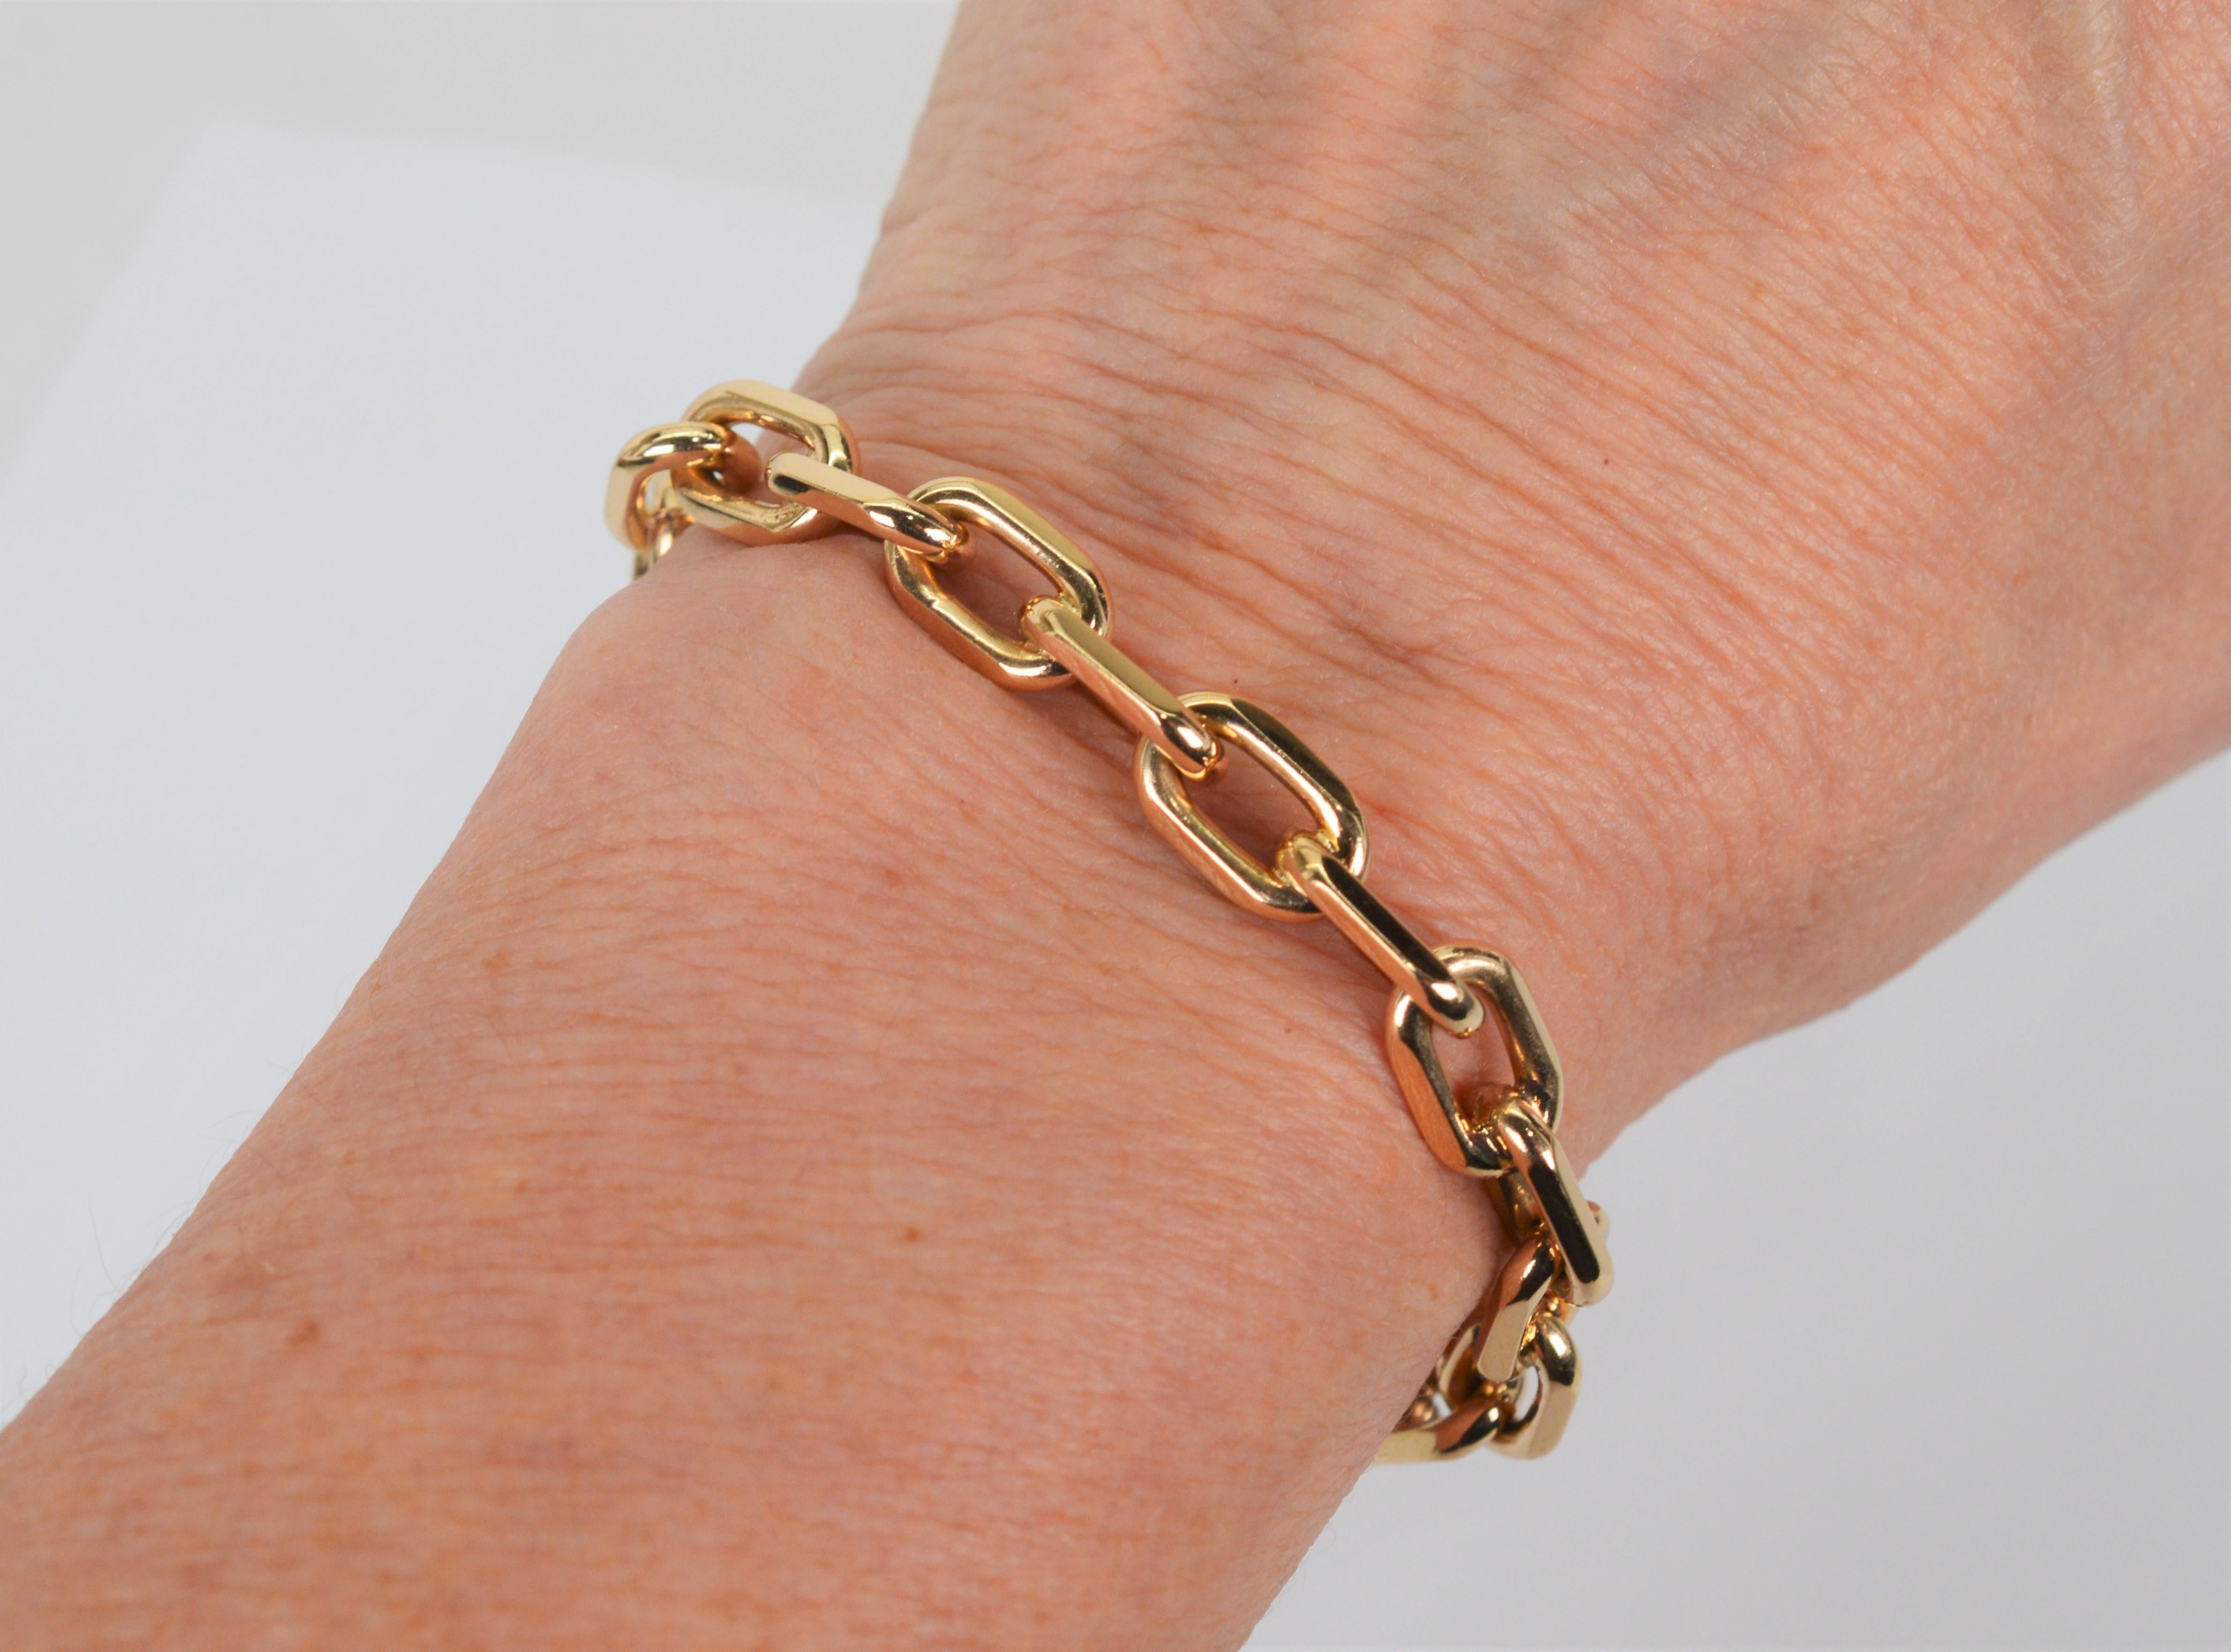 14 Karat Yellow Gold Paper Clip Chain Bracelet In Good Condition For Sale In Mount Kisco, NY